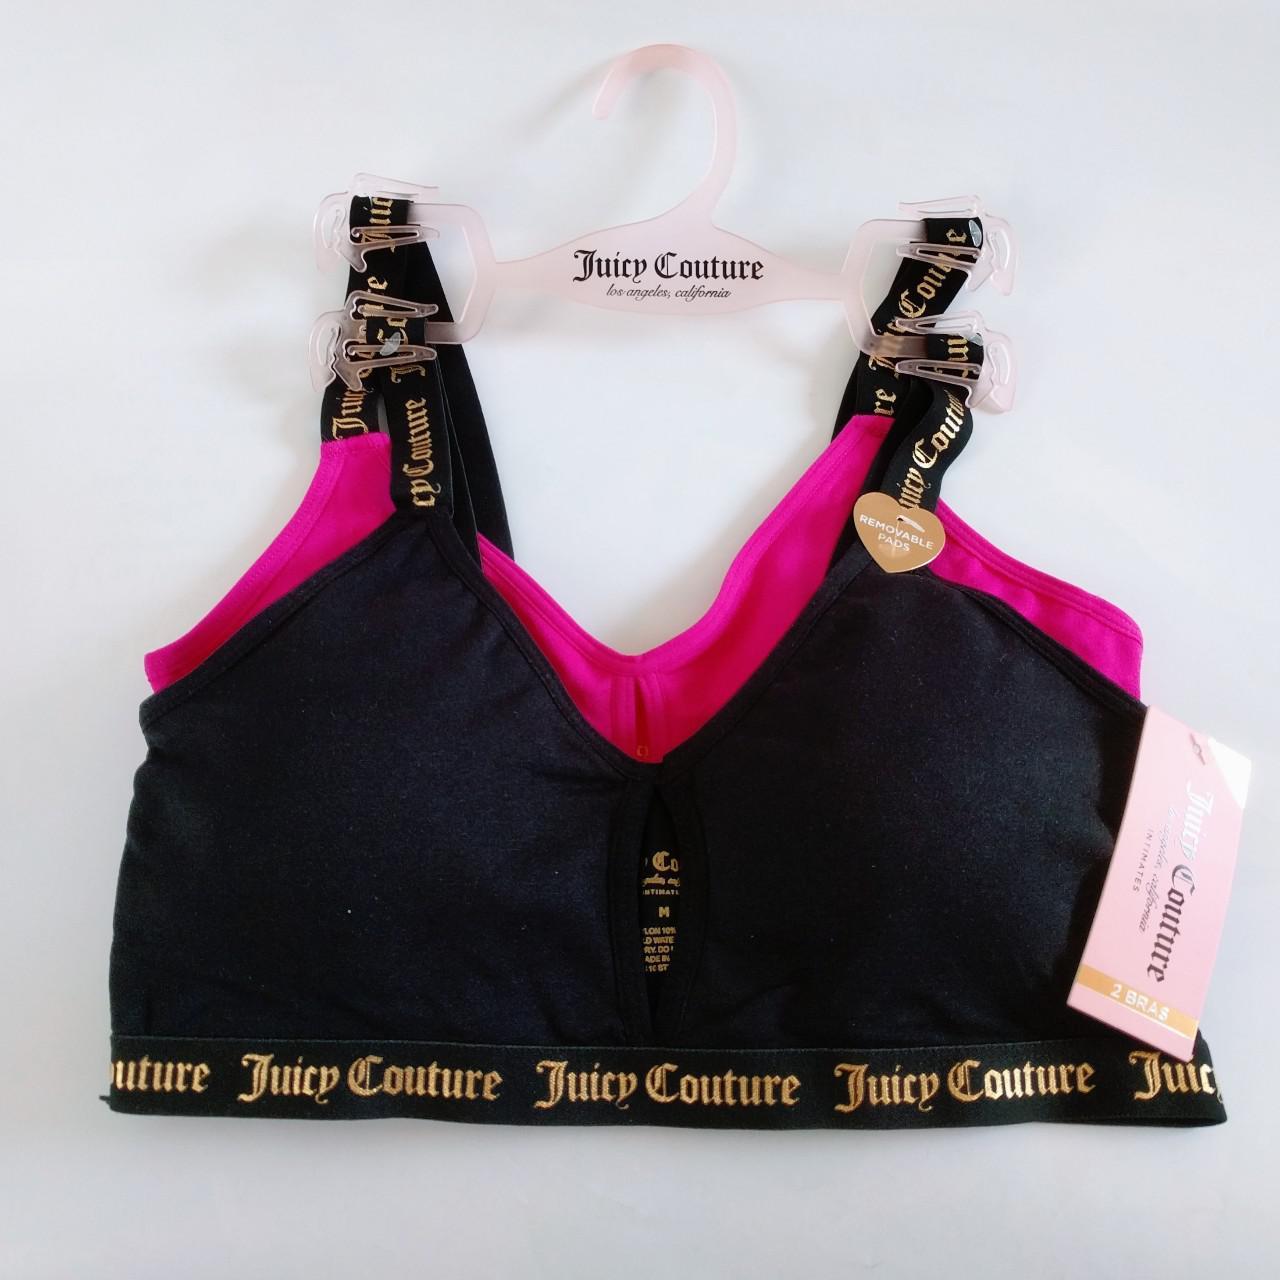 NWT Juicy Couture Intimates Bra Pack of 2 Pink & Black Size 38DD